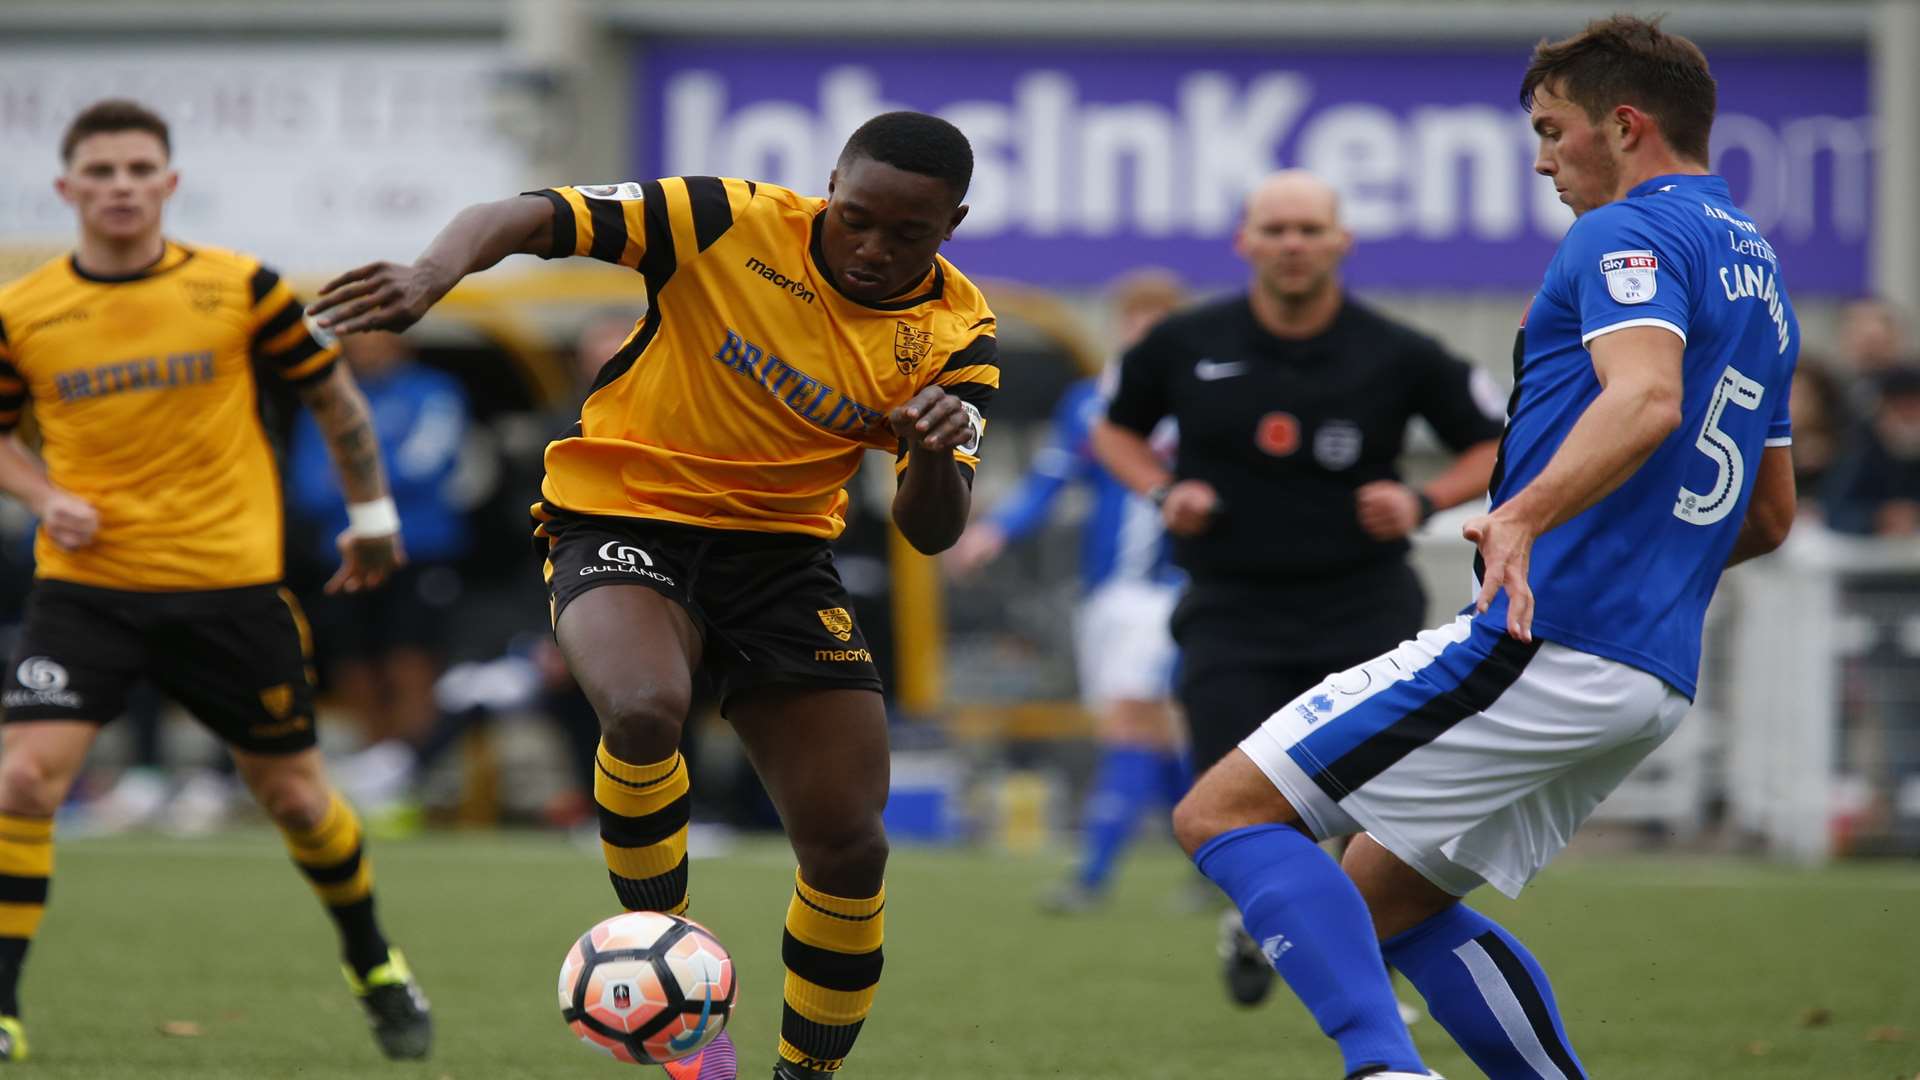 Jamar Loza shows quick feet against the League 1 visitors Picture: Andy Jones